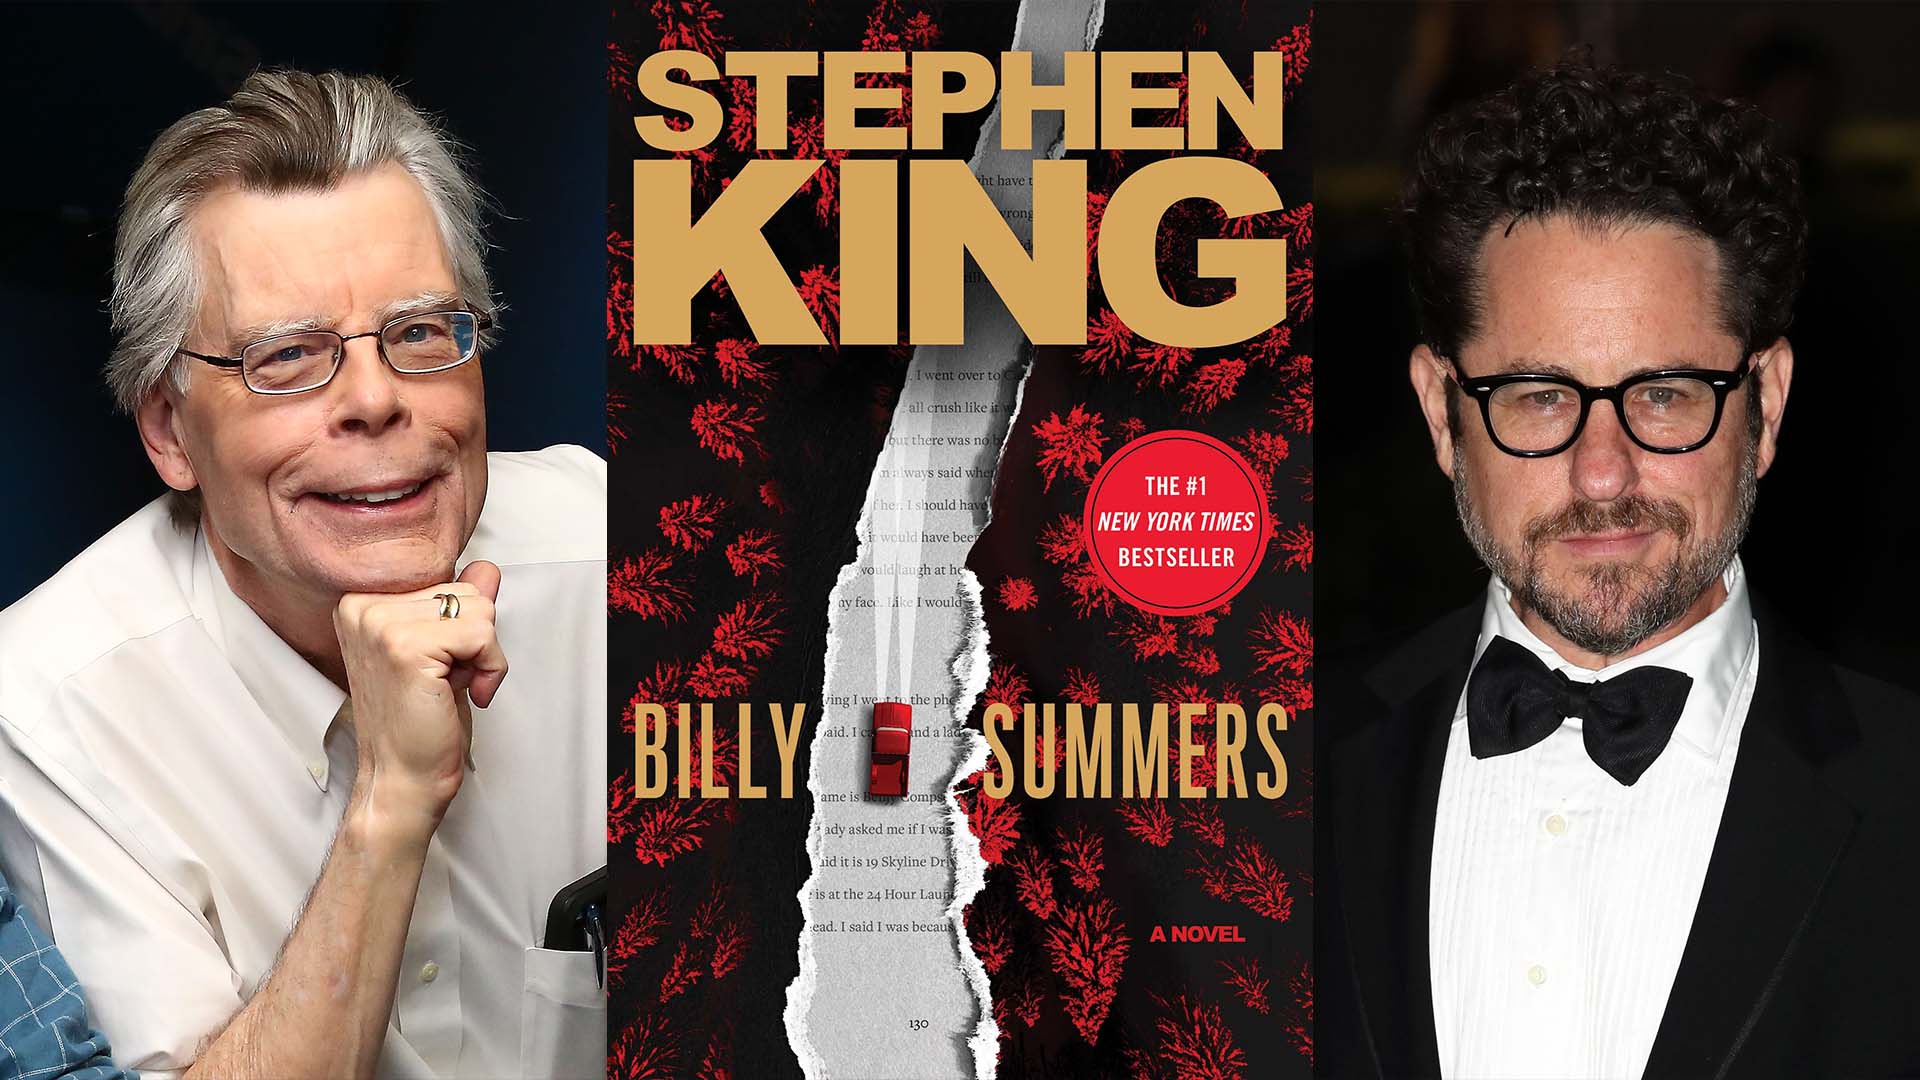 J.J. Abrams’ Bad Robot lines up new Stephen King TV adaptation with thriller ‘Billy Summers’